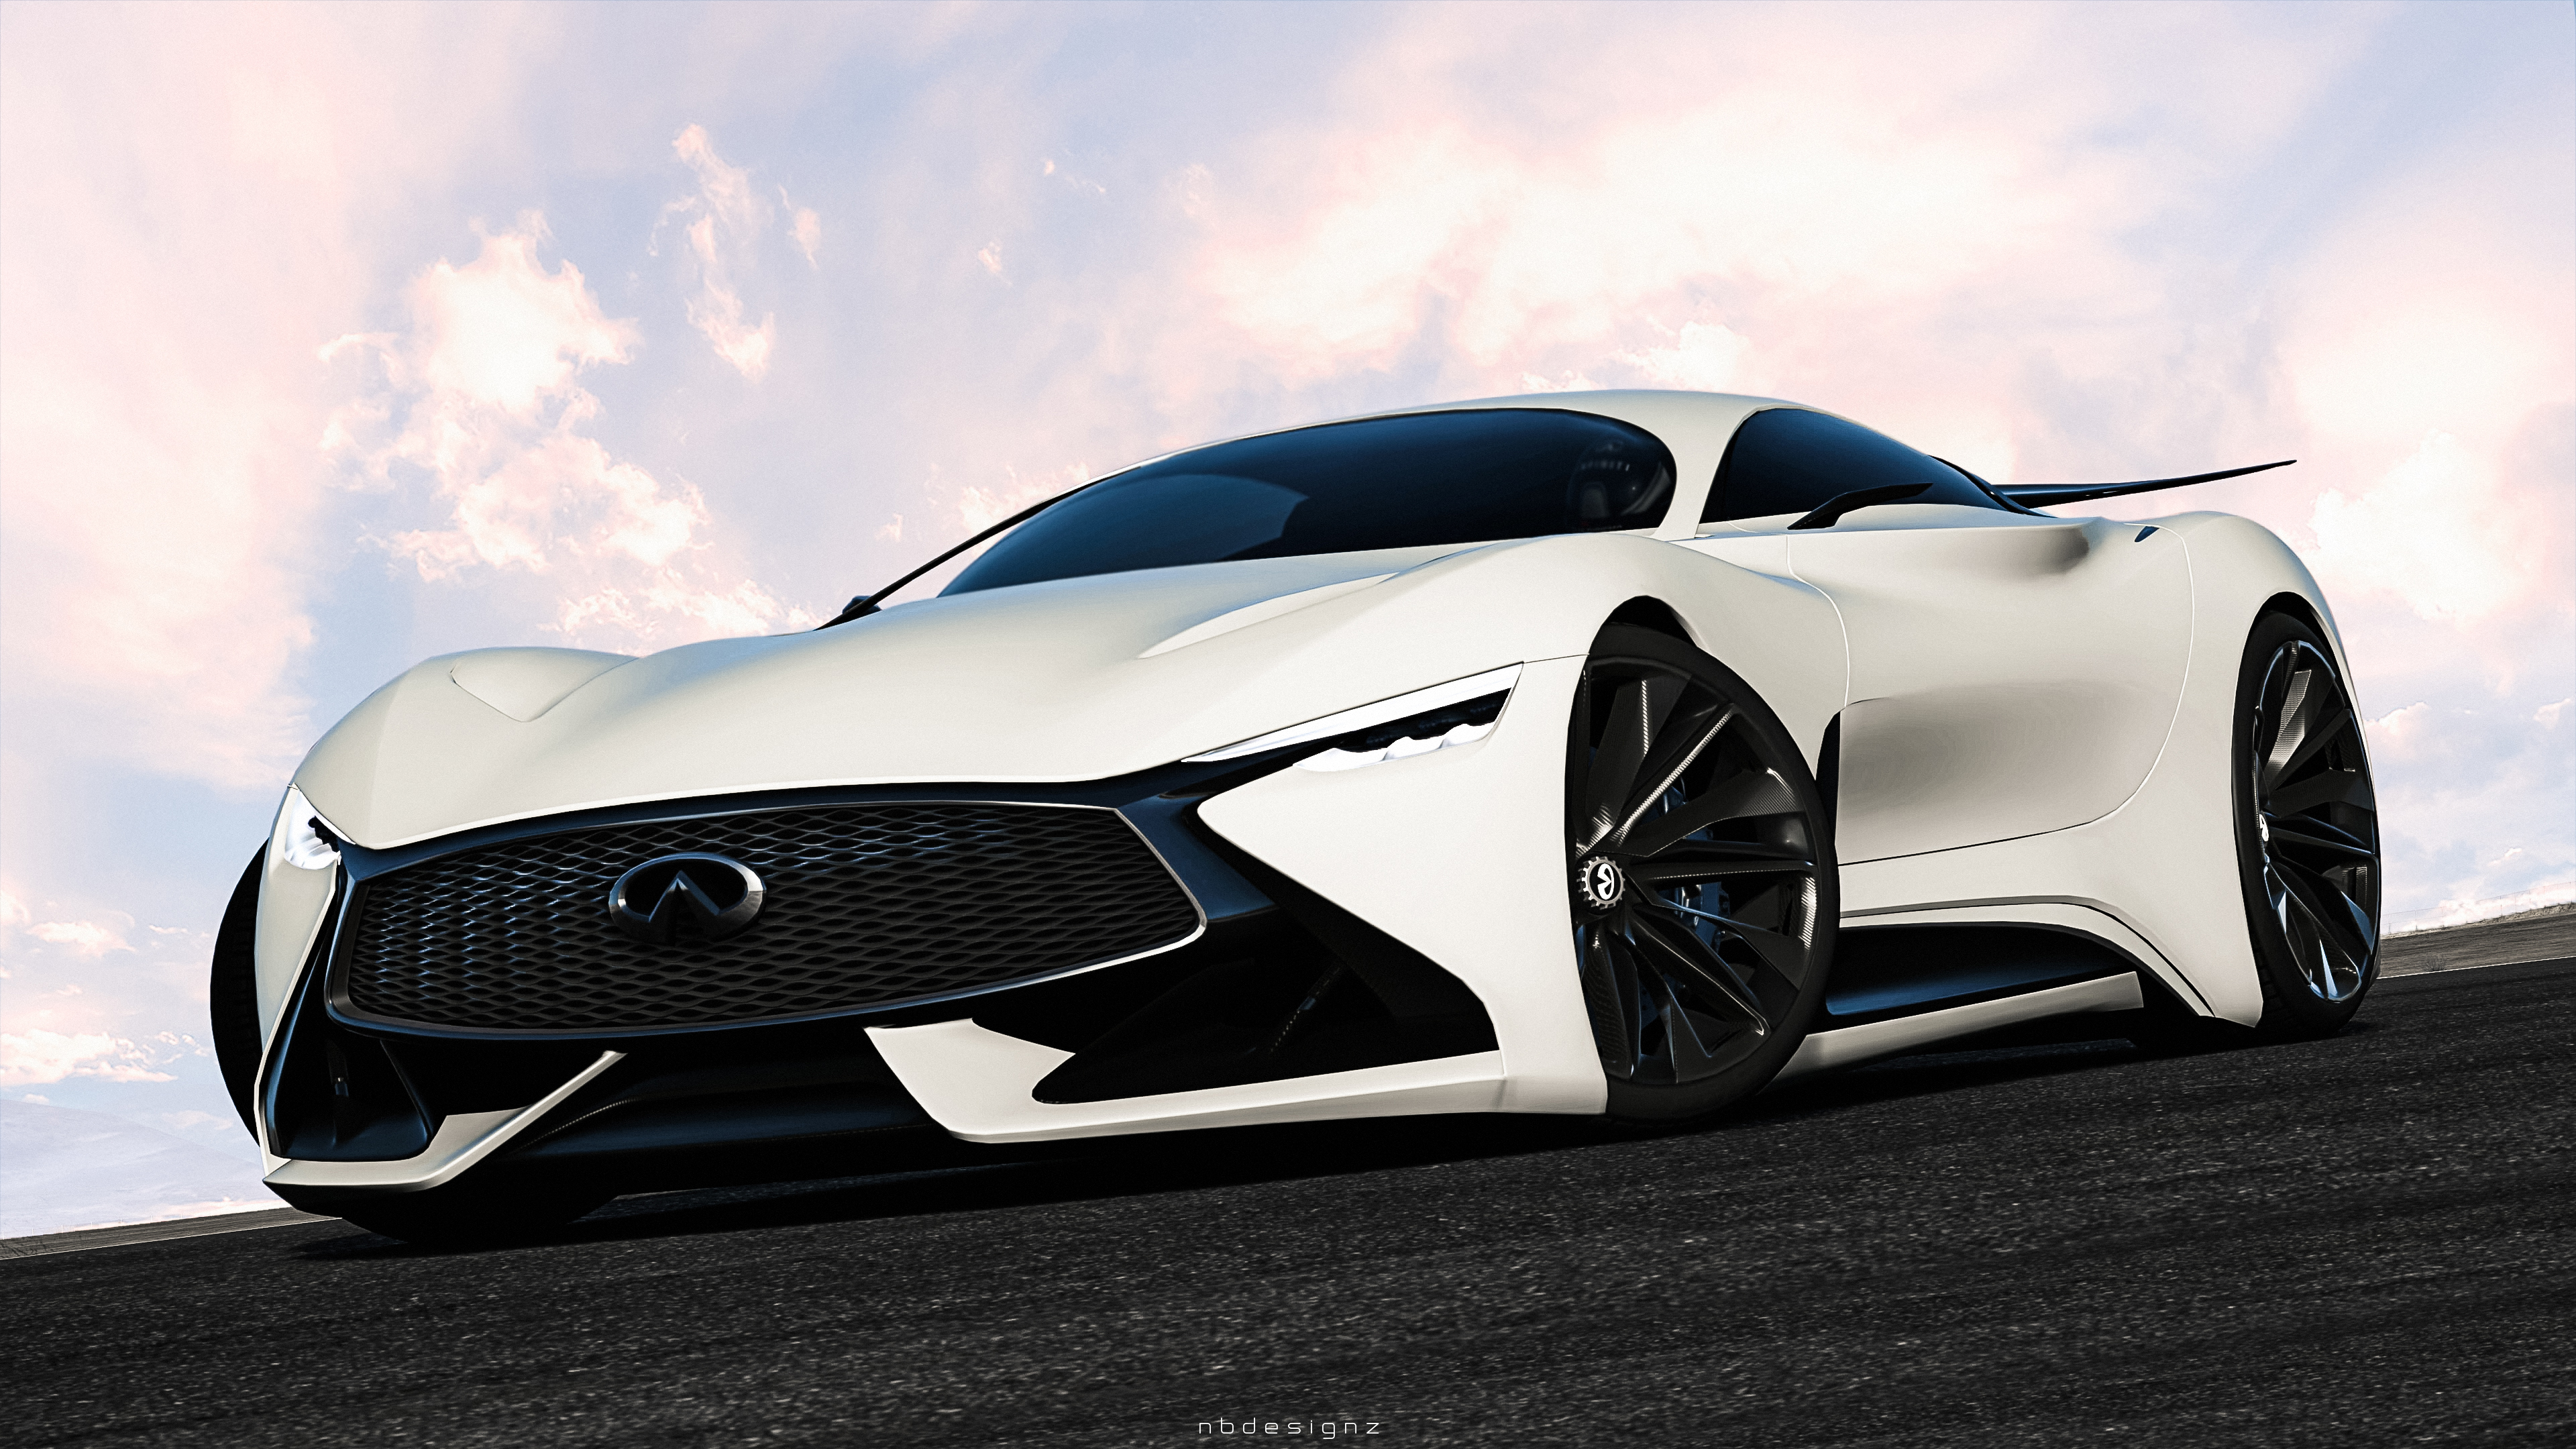 Infiniti Vision Gt Concept Gran Turismo 6related Car Wallpapers Images, Photos, Reviews